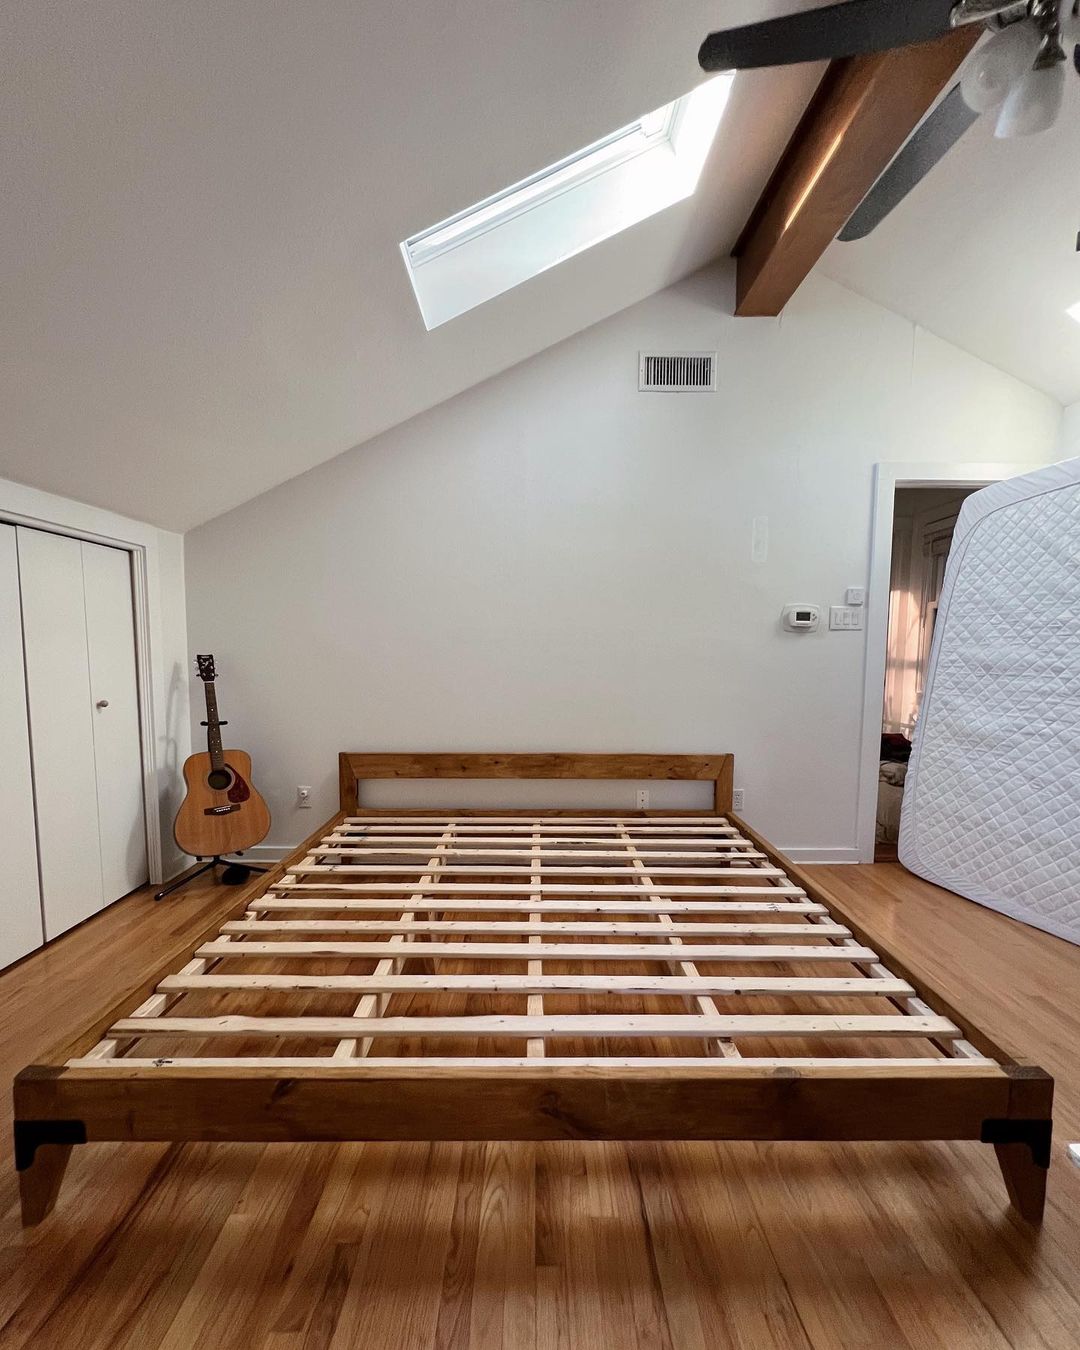 Bedframe assembled with slats exposed